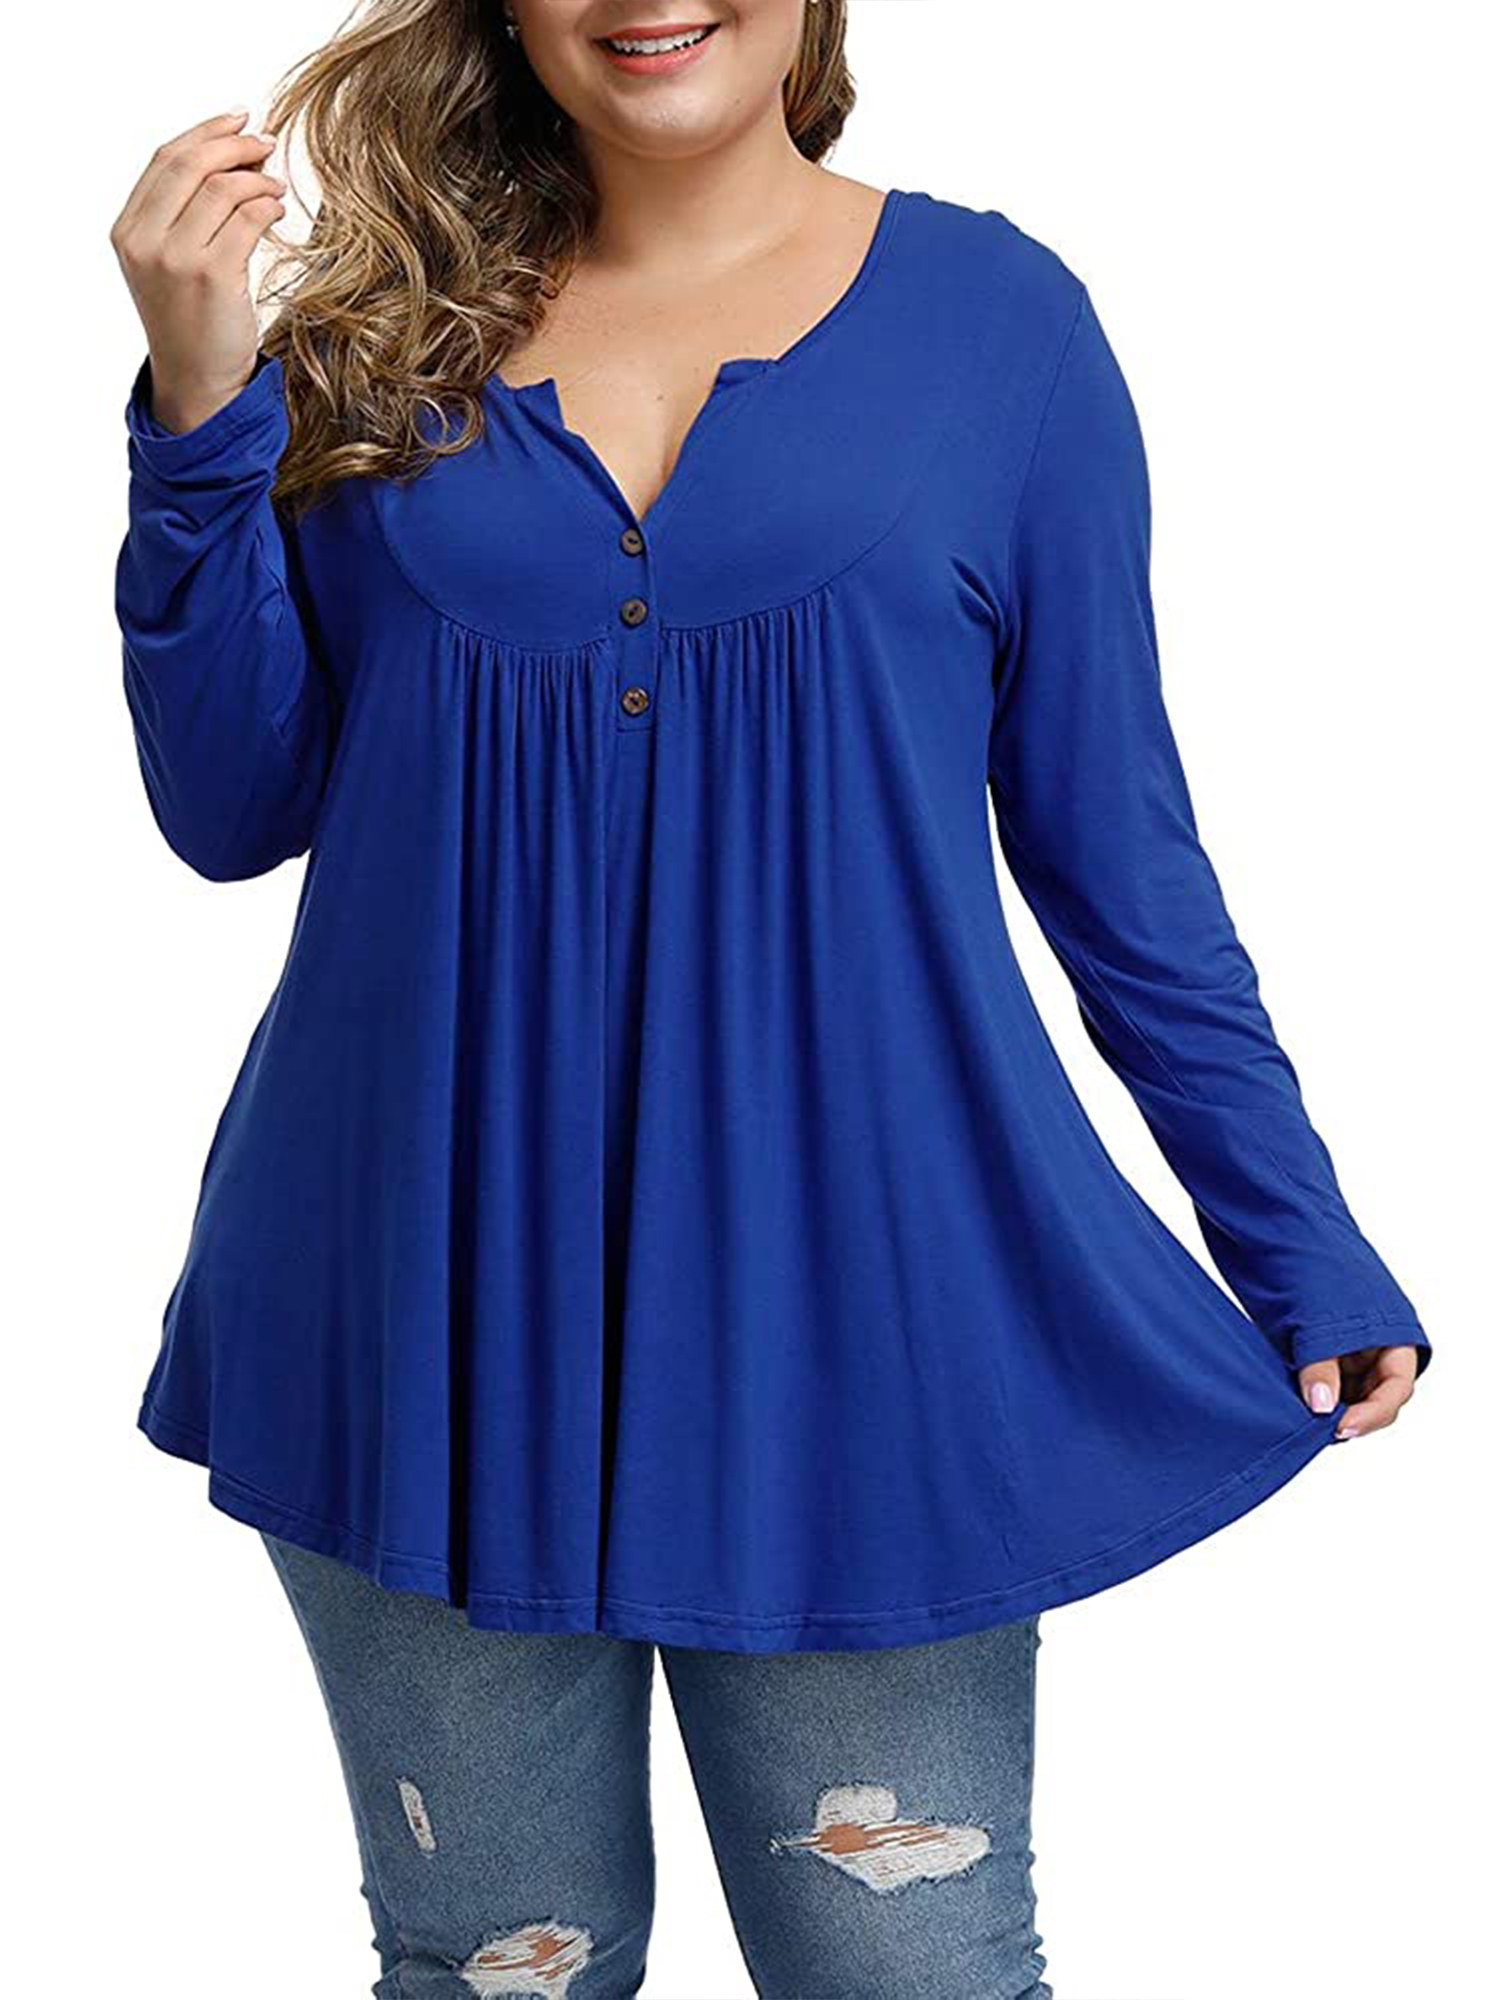 Model wearing the blue v-neck henley button-up tunic top